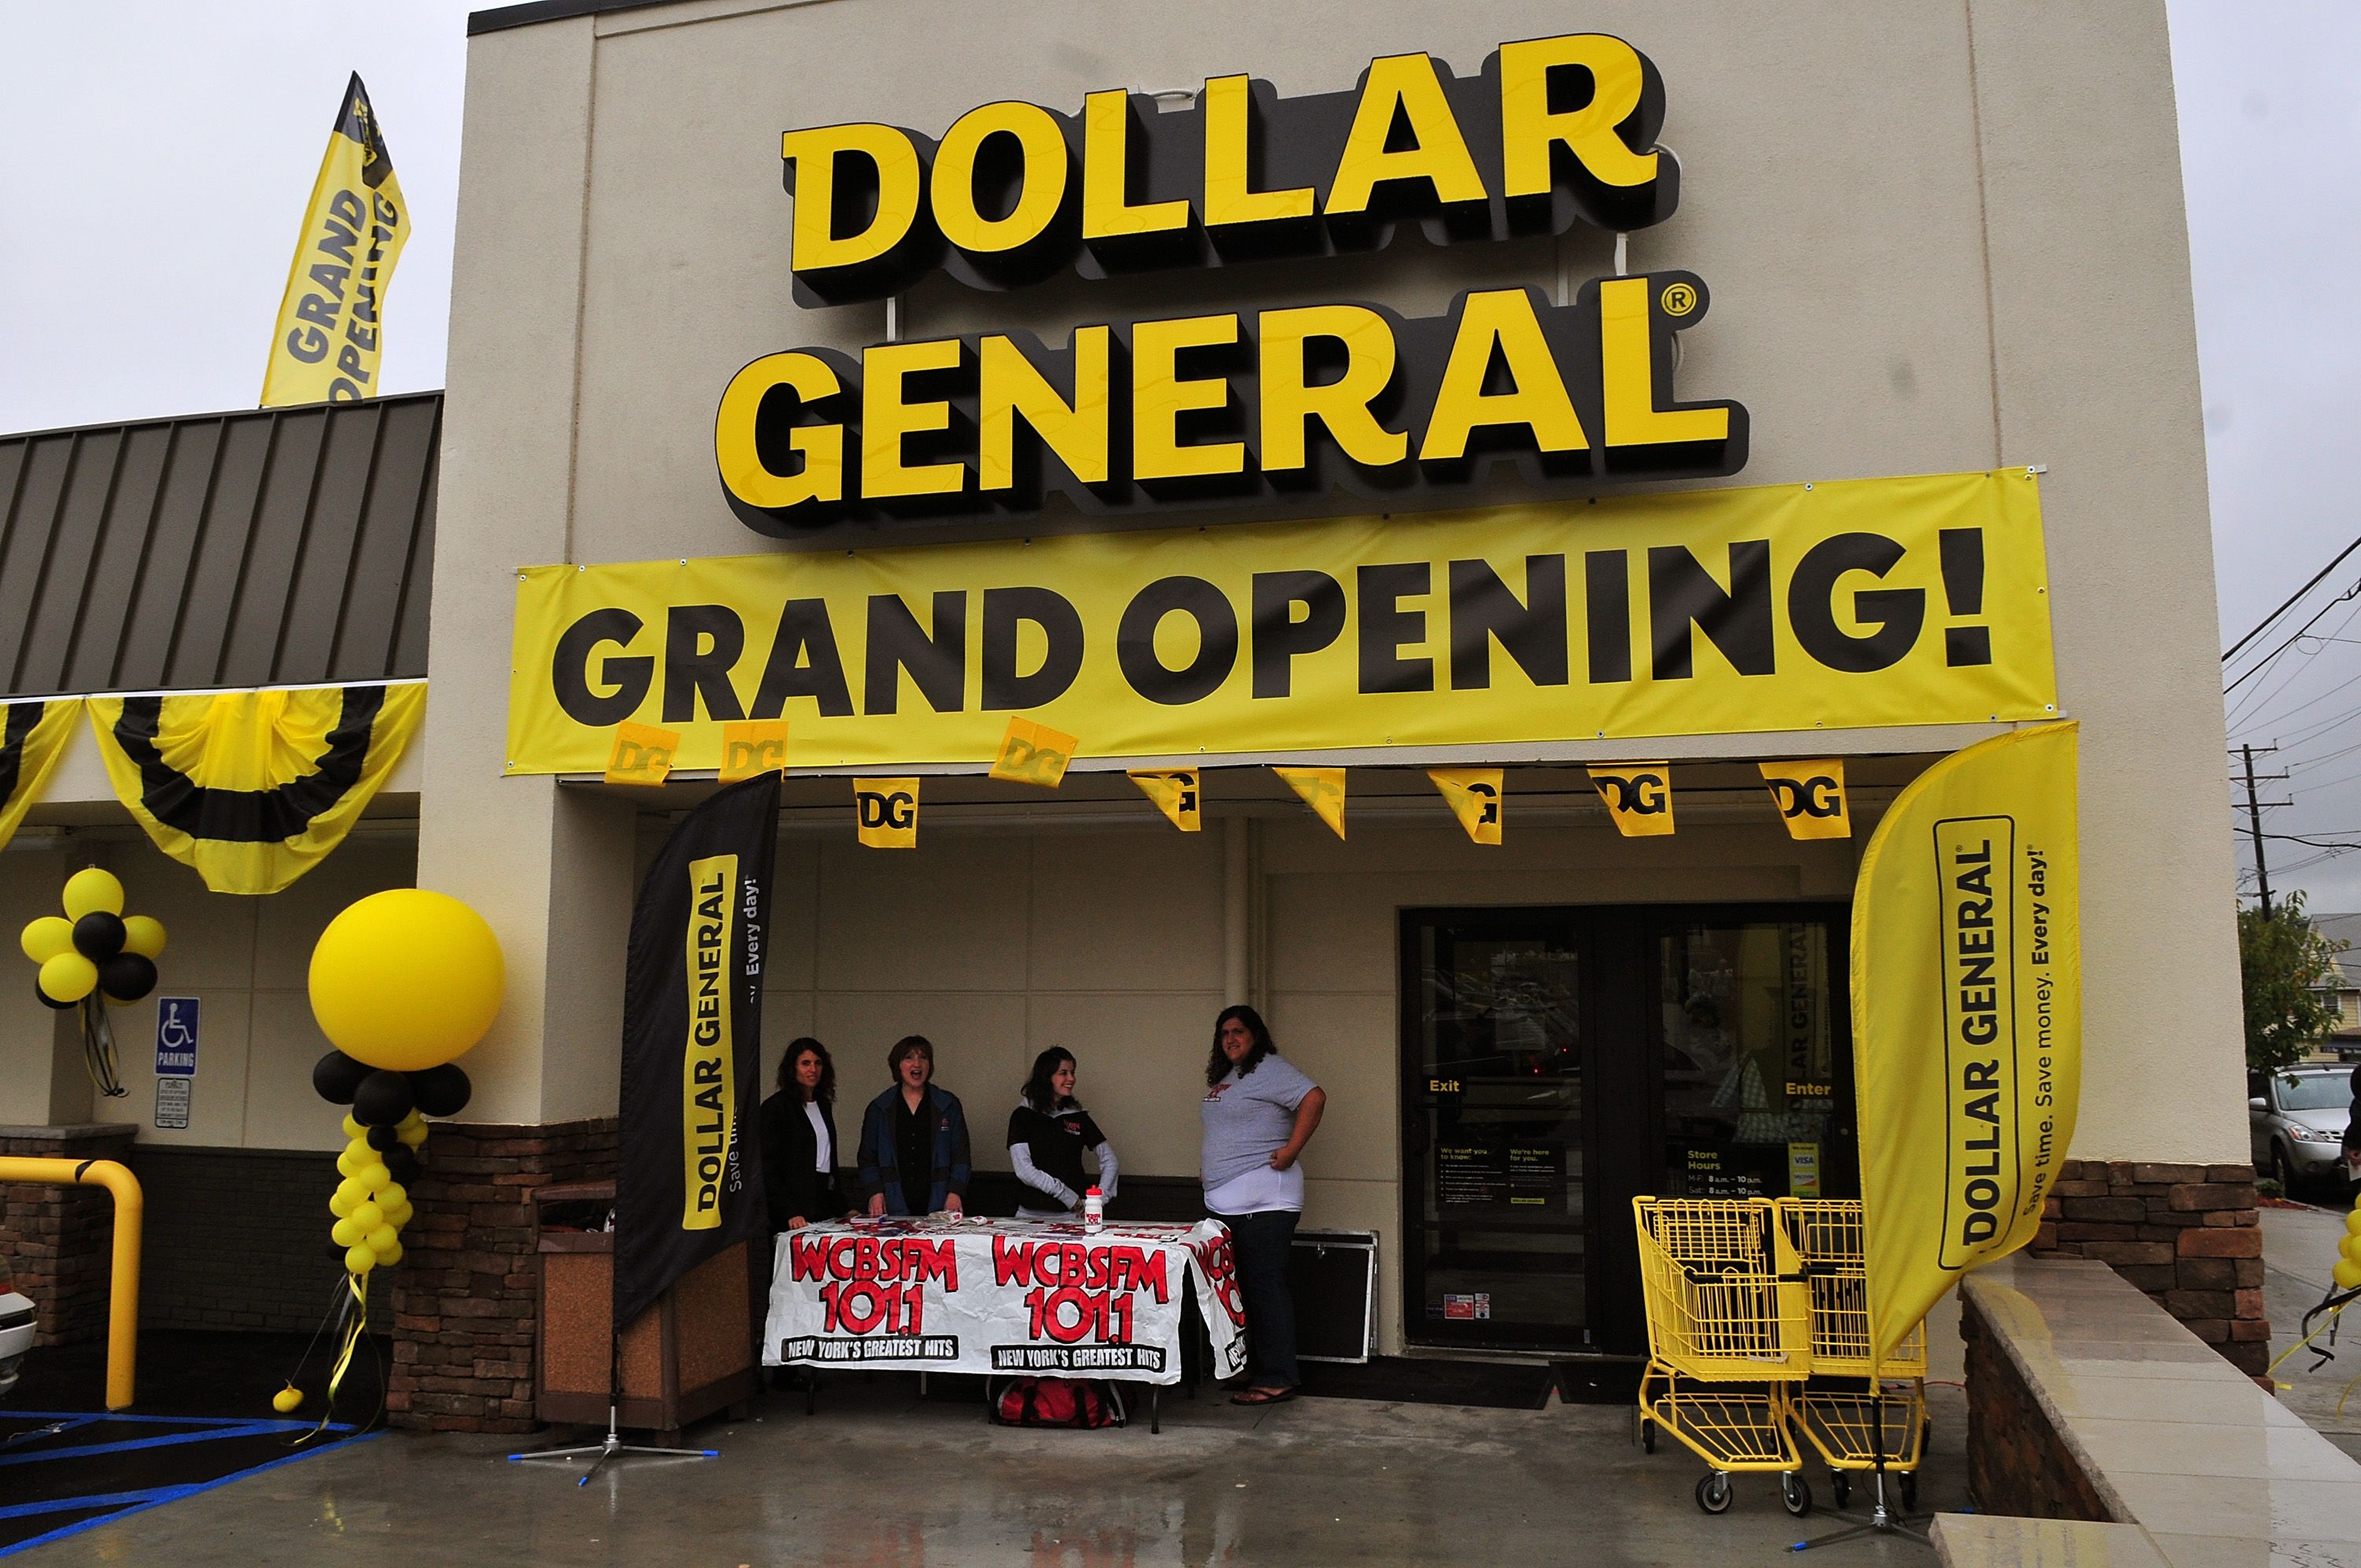 Dollar General to open 1,000 Popshelf stores, aimed at wealthier shoppers